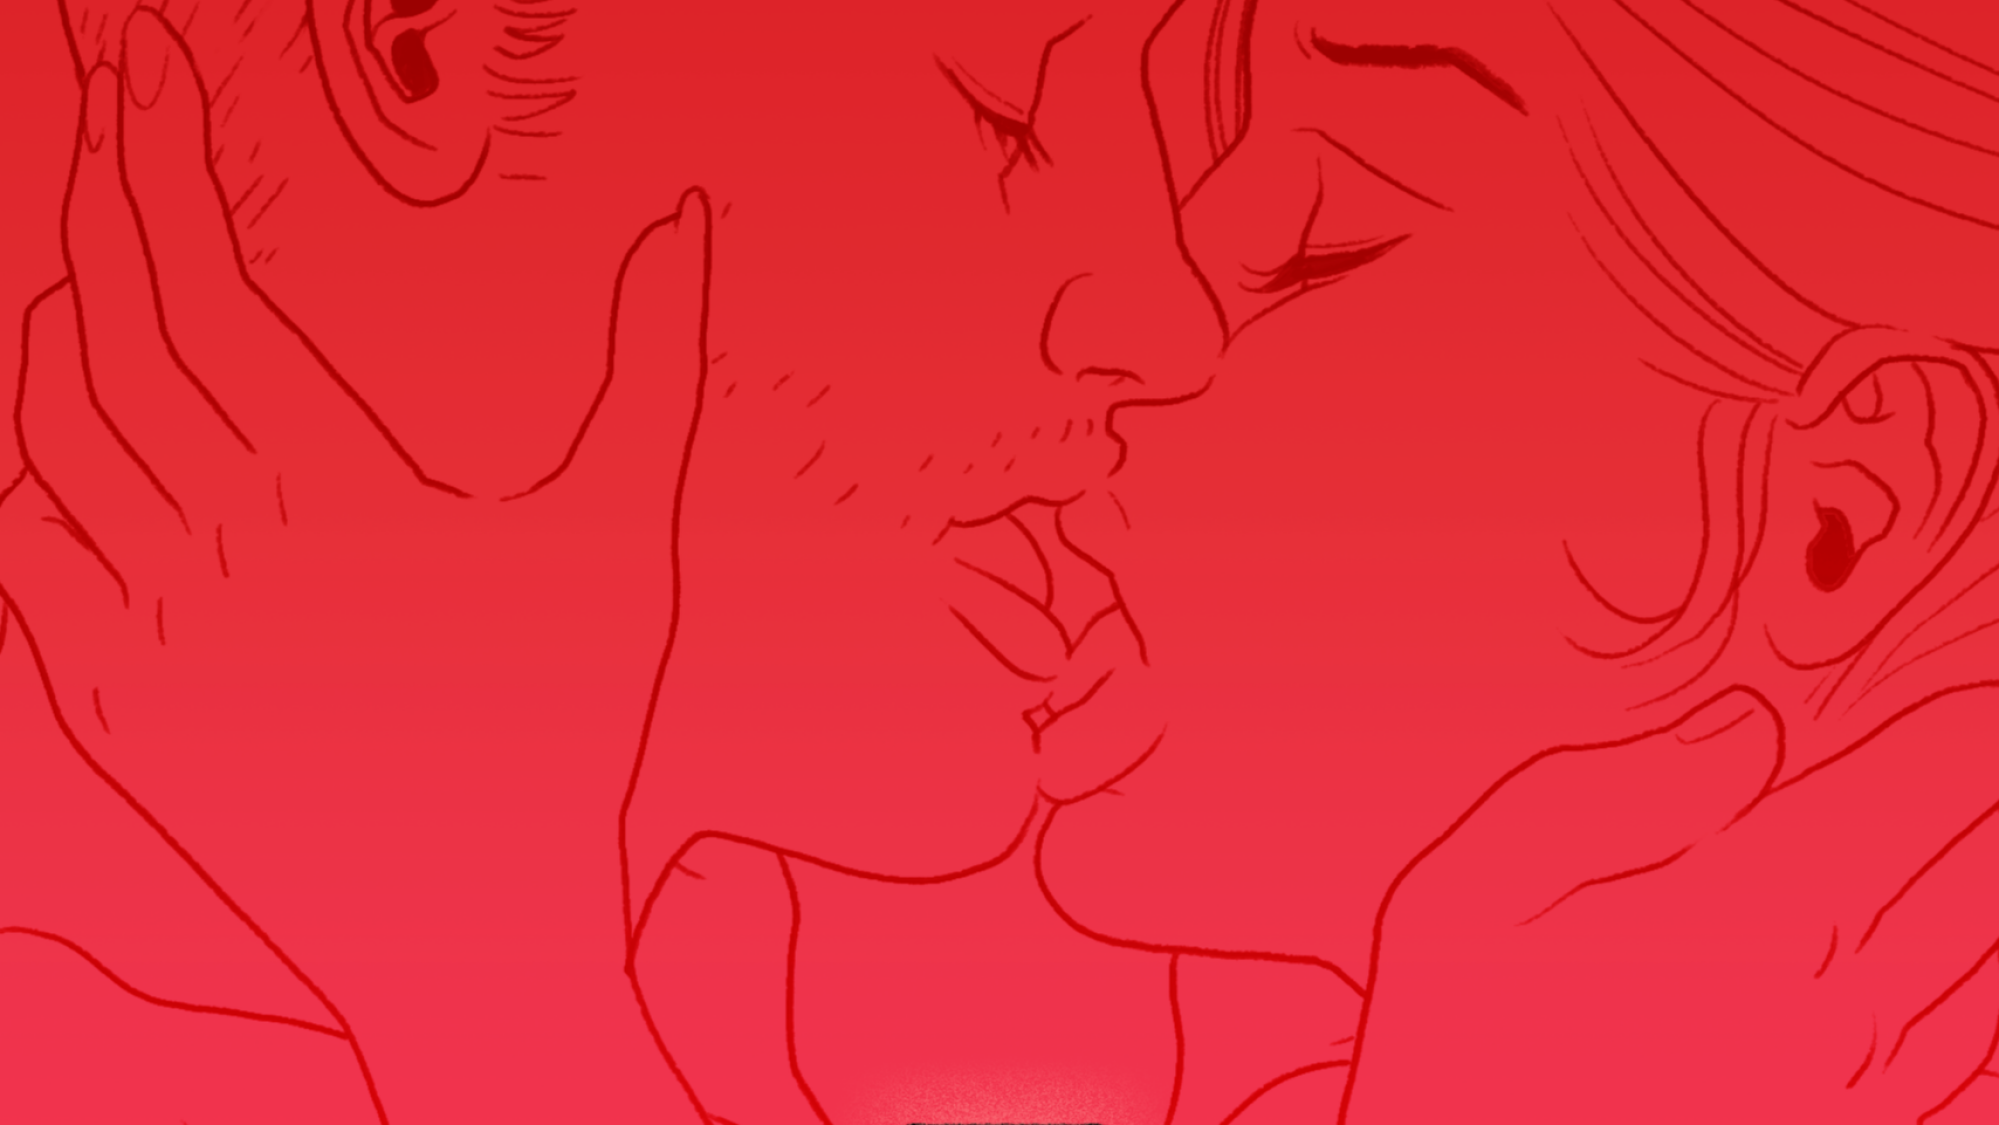 Illustration on a red backdrop of a man and woman kissing.